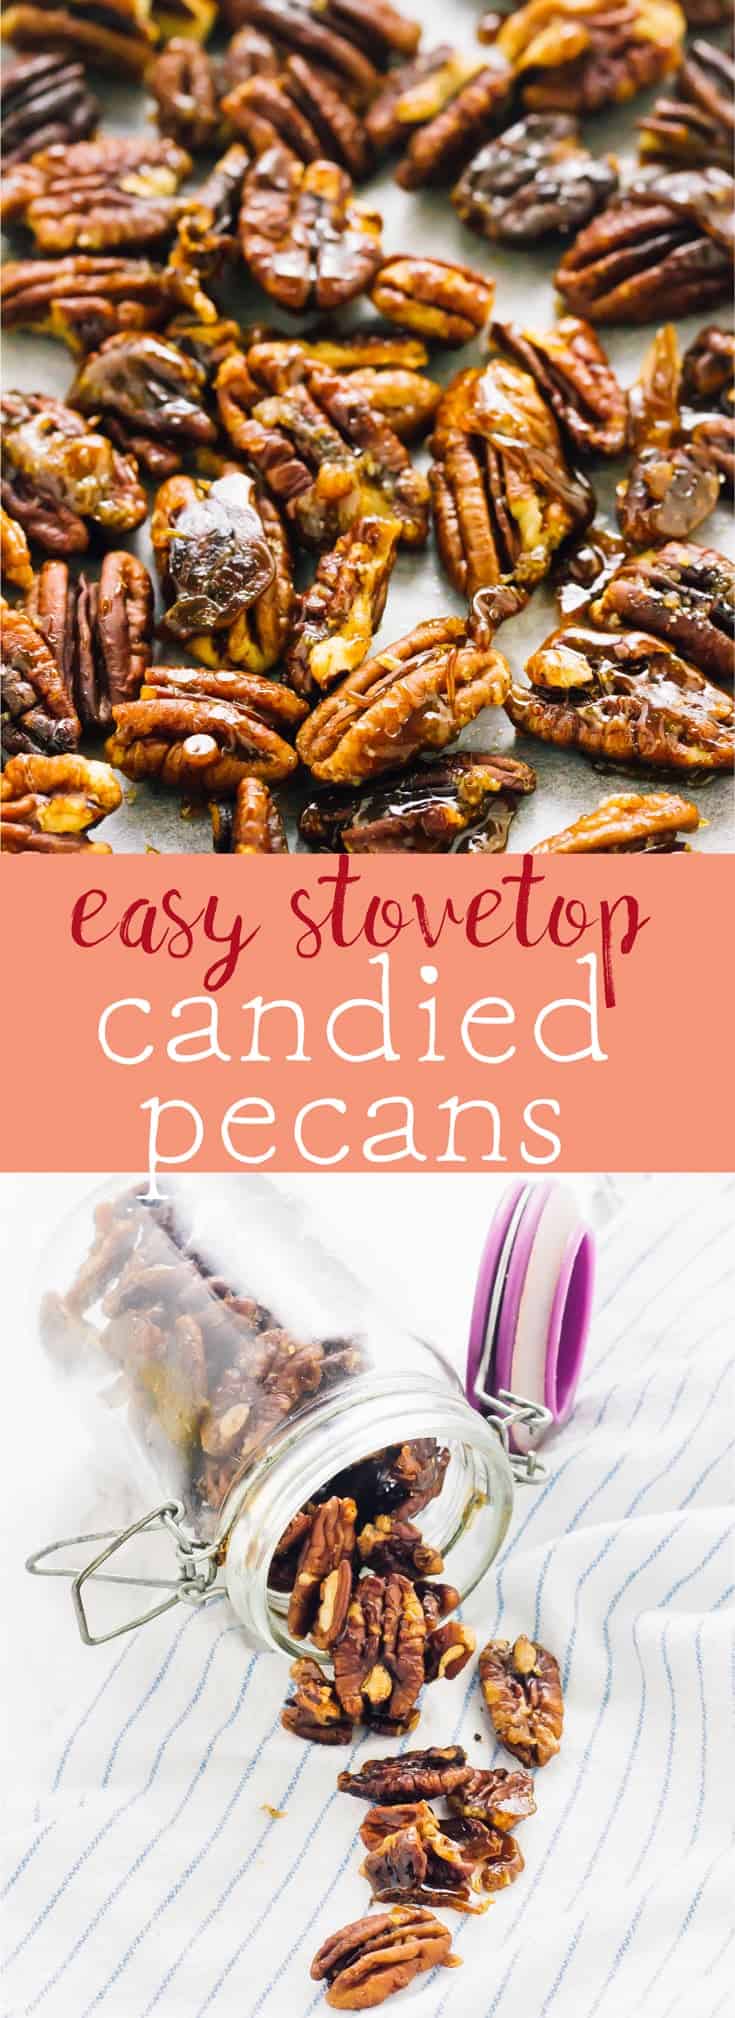 These Easy Stovetop Candied Pecans are deliciously crunchy and are perfect for topping everything from breakfasts to salads to desserts! via https://jessicainthekitchen.com